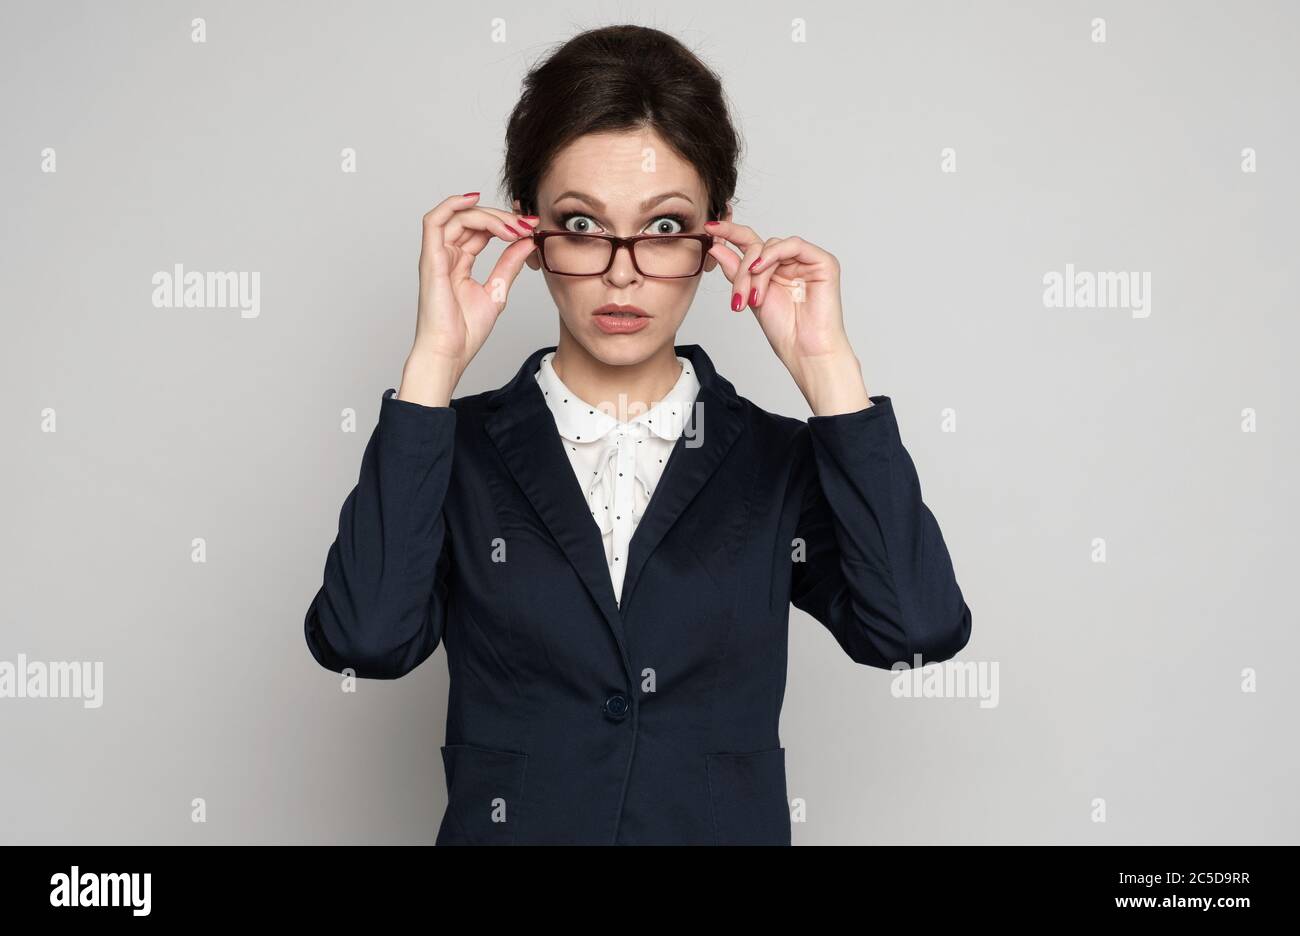 Shocked business woman staring at camera above her eyeglasses Stock Photo